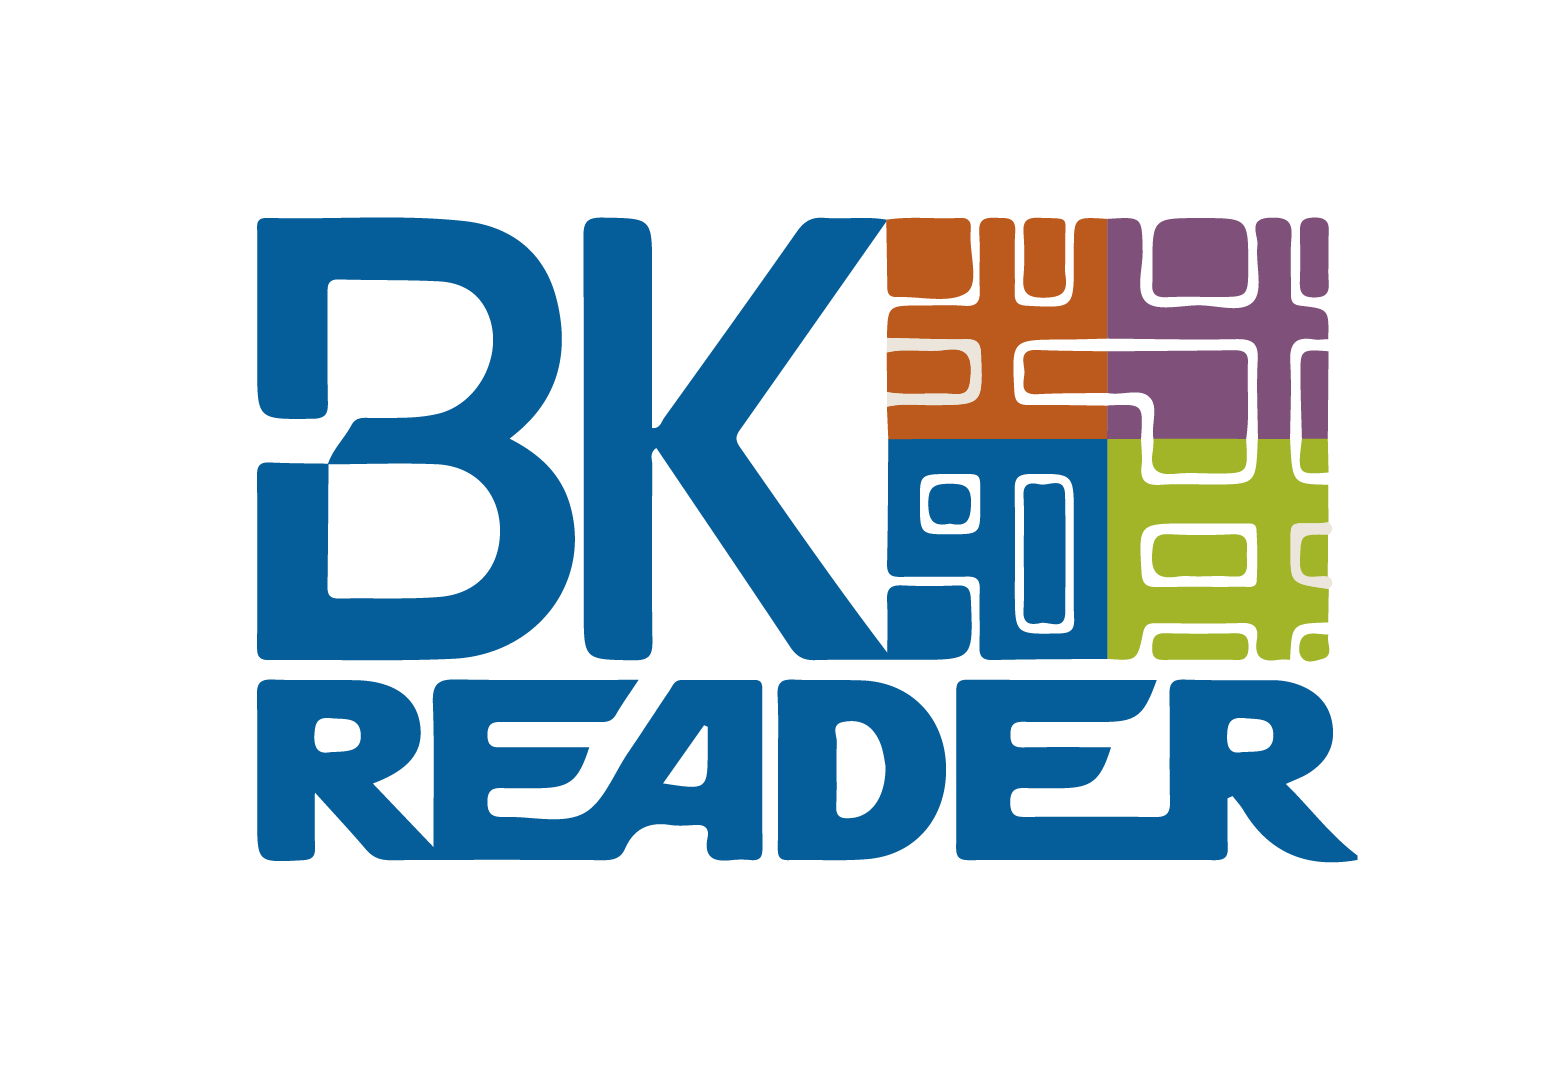 https://www.intersectionatthejunction.com/content/4-about/1-press/bklyner-logo-03.png